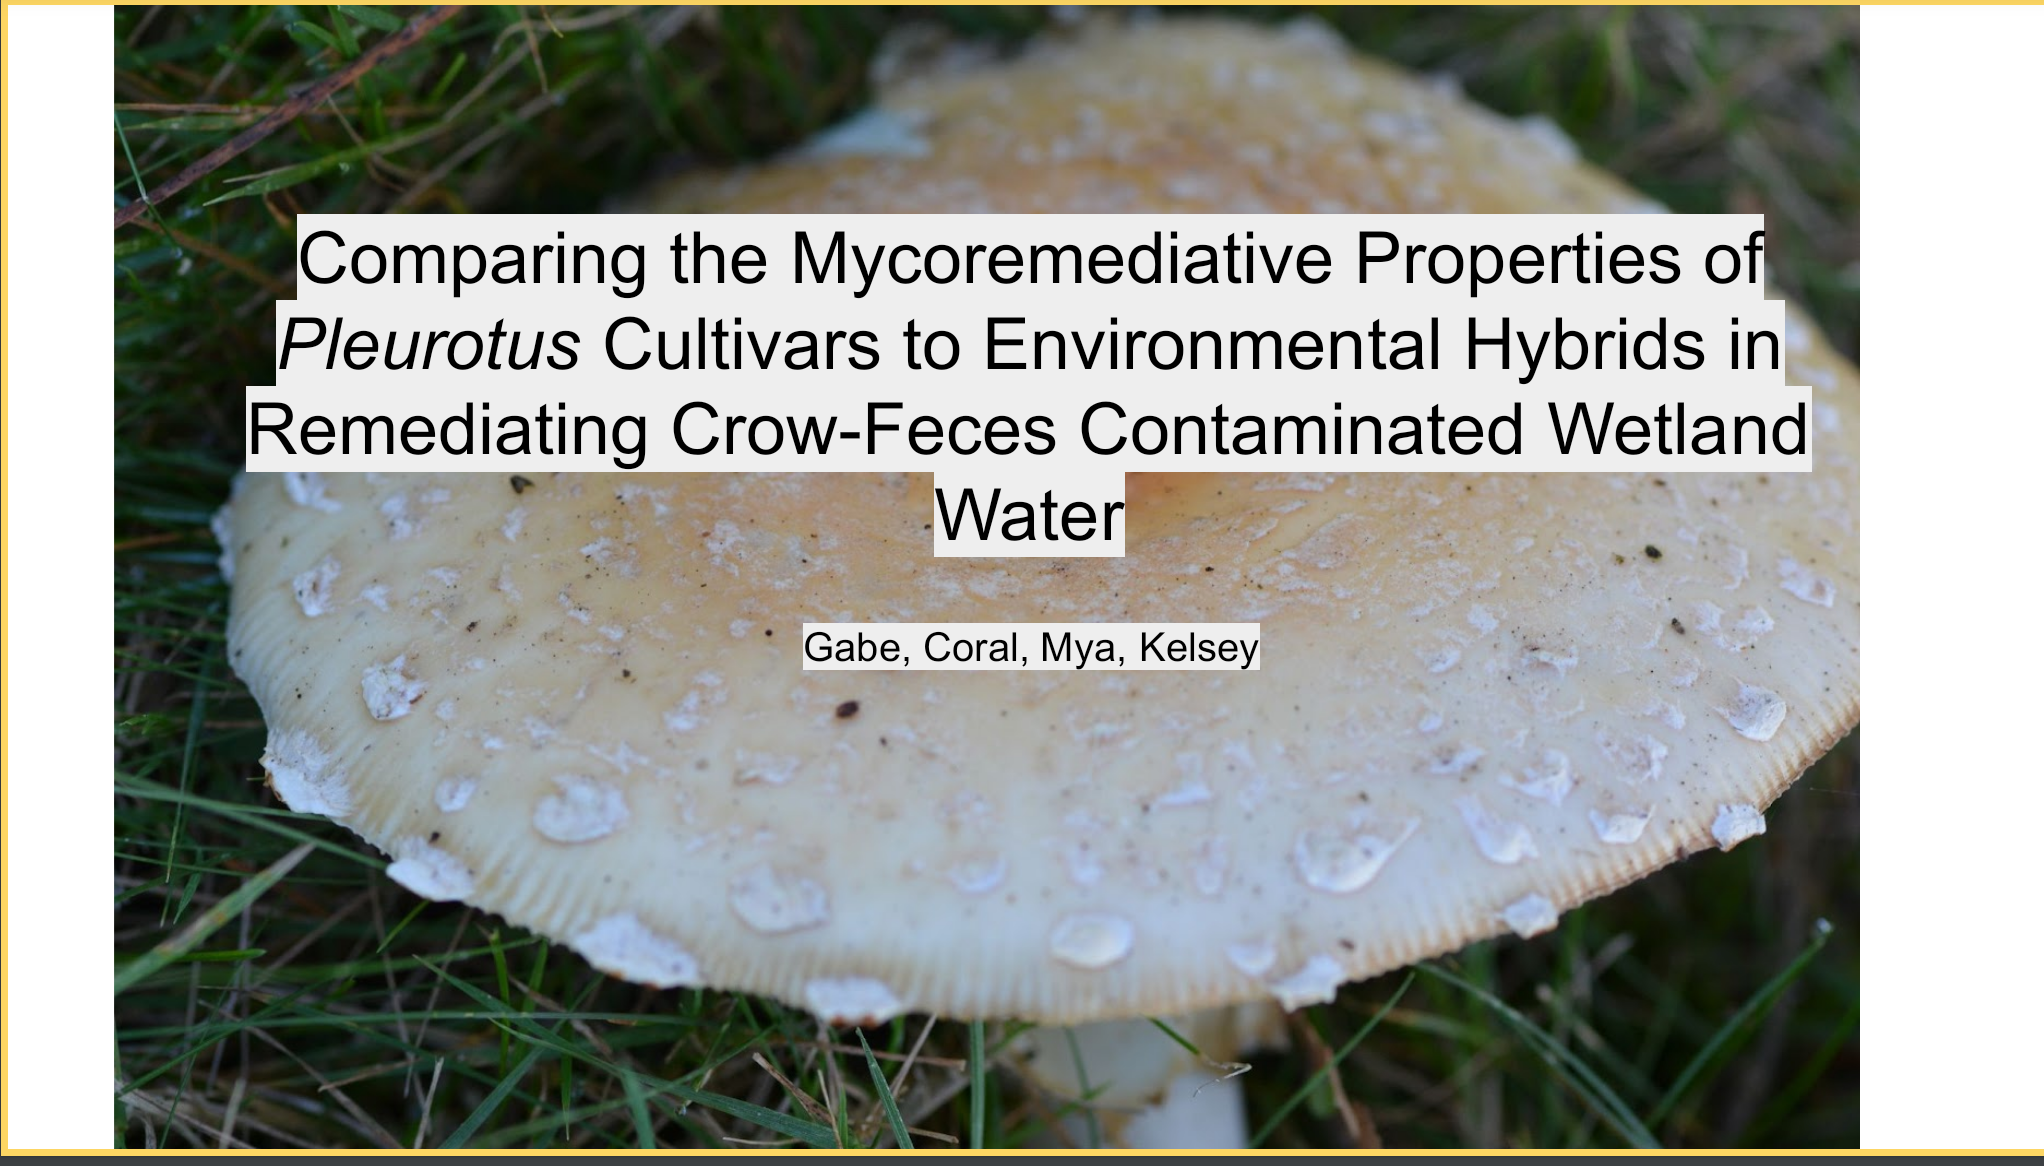 Comparing the Mycoremediative Properties of Pleurotus Cultivars to Environmental Hybrids in Remediating Crow-Feces Contaminated Wetland Water poster